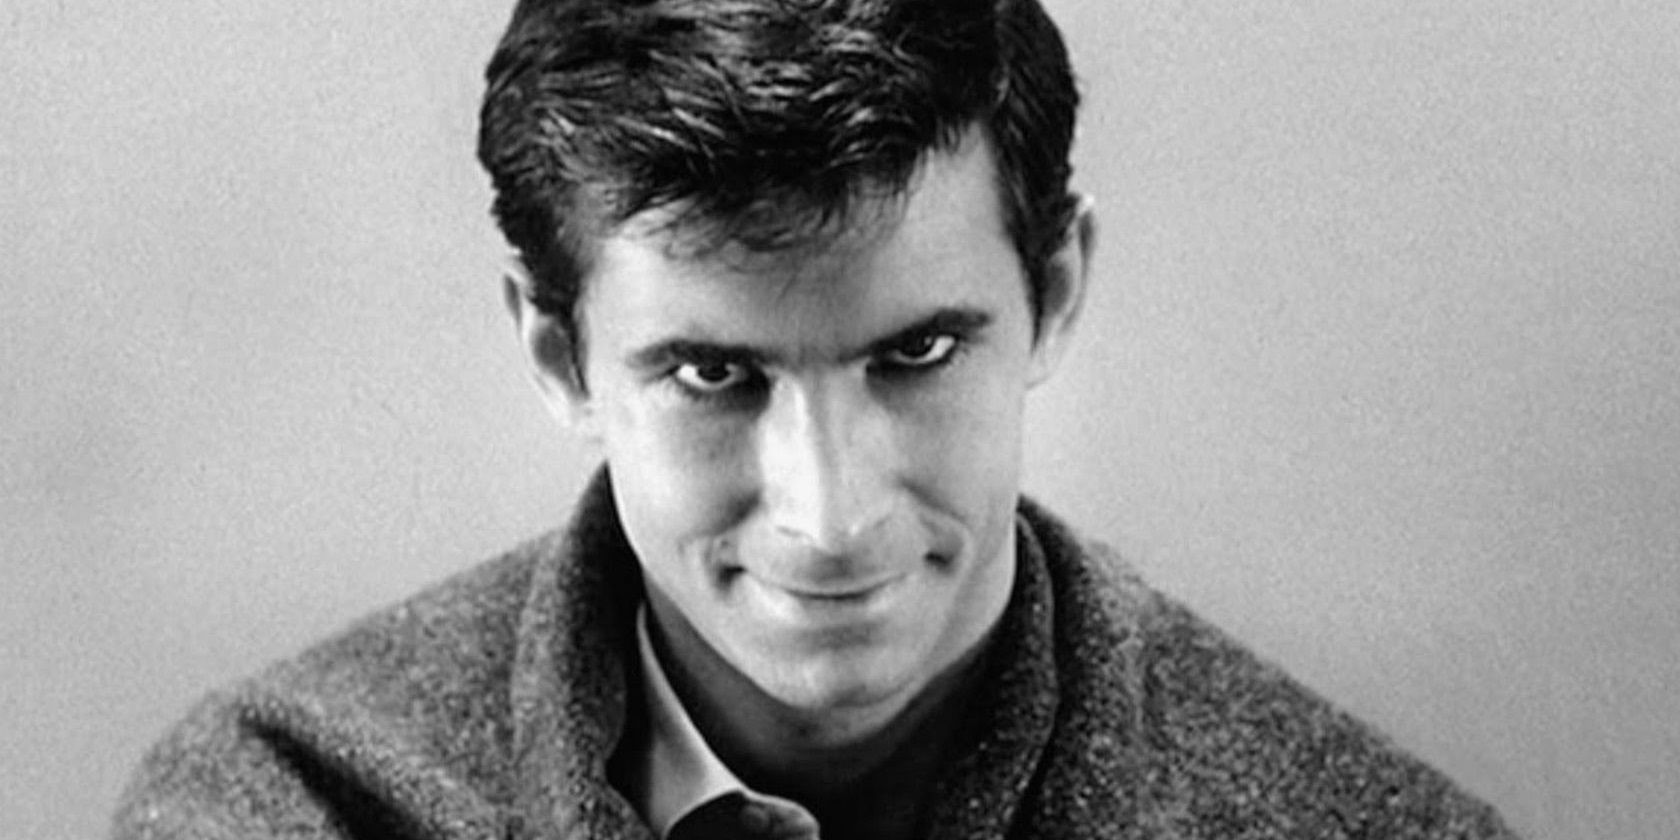 Psycho 5 Ways Its The Greatest Thriller Ever Made (& Its 5 Closest Contenders)